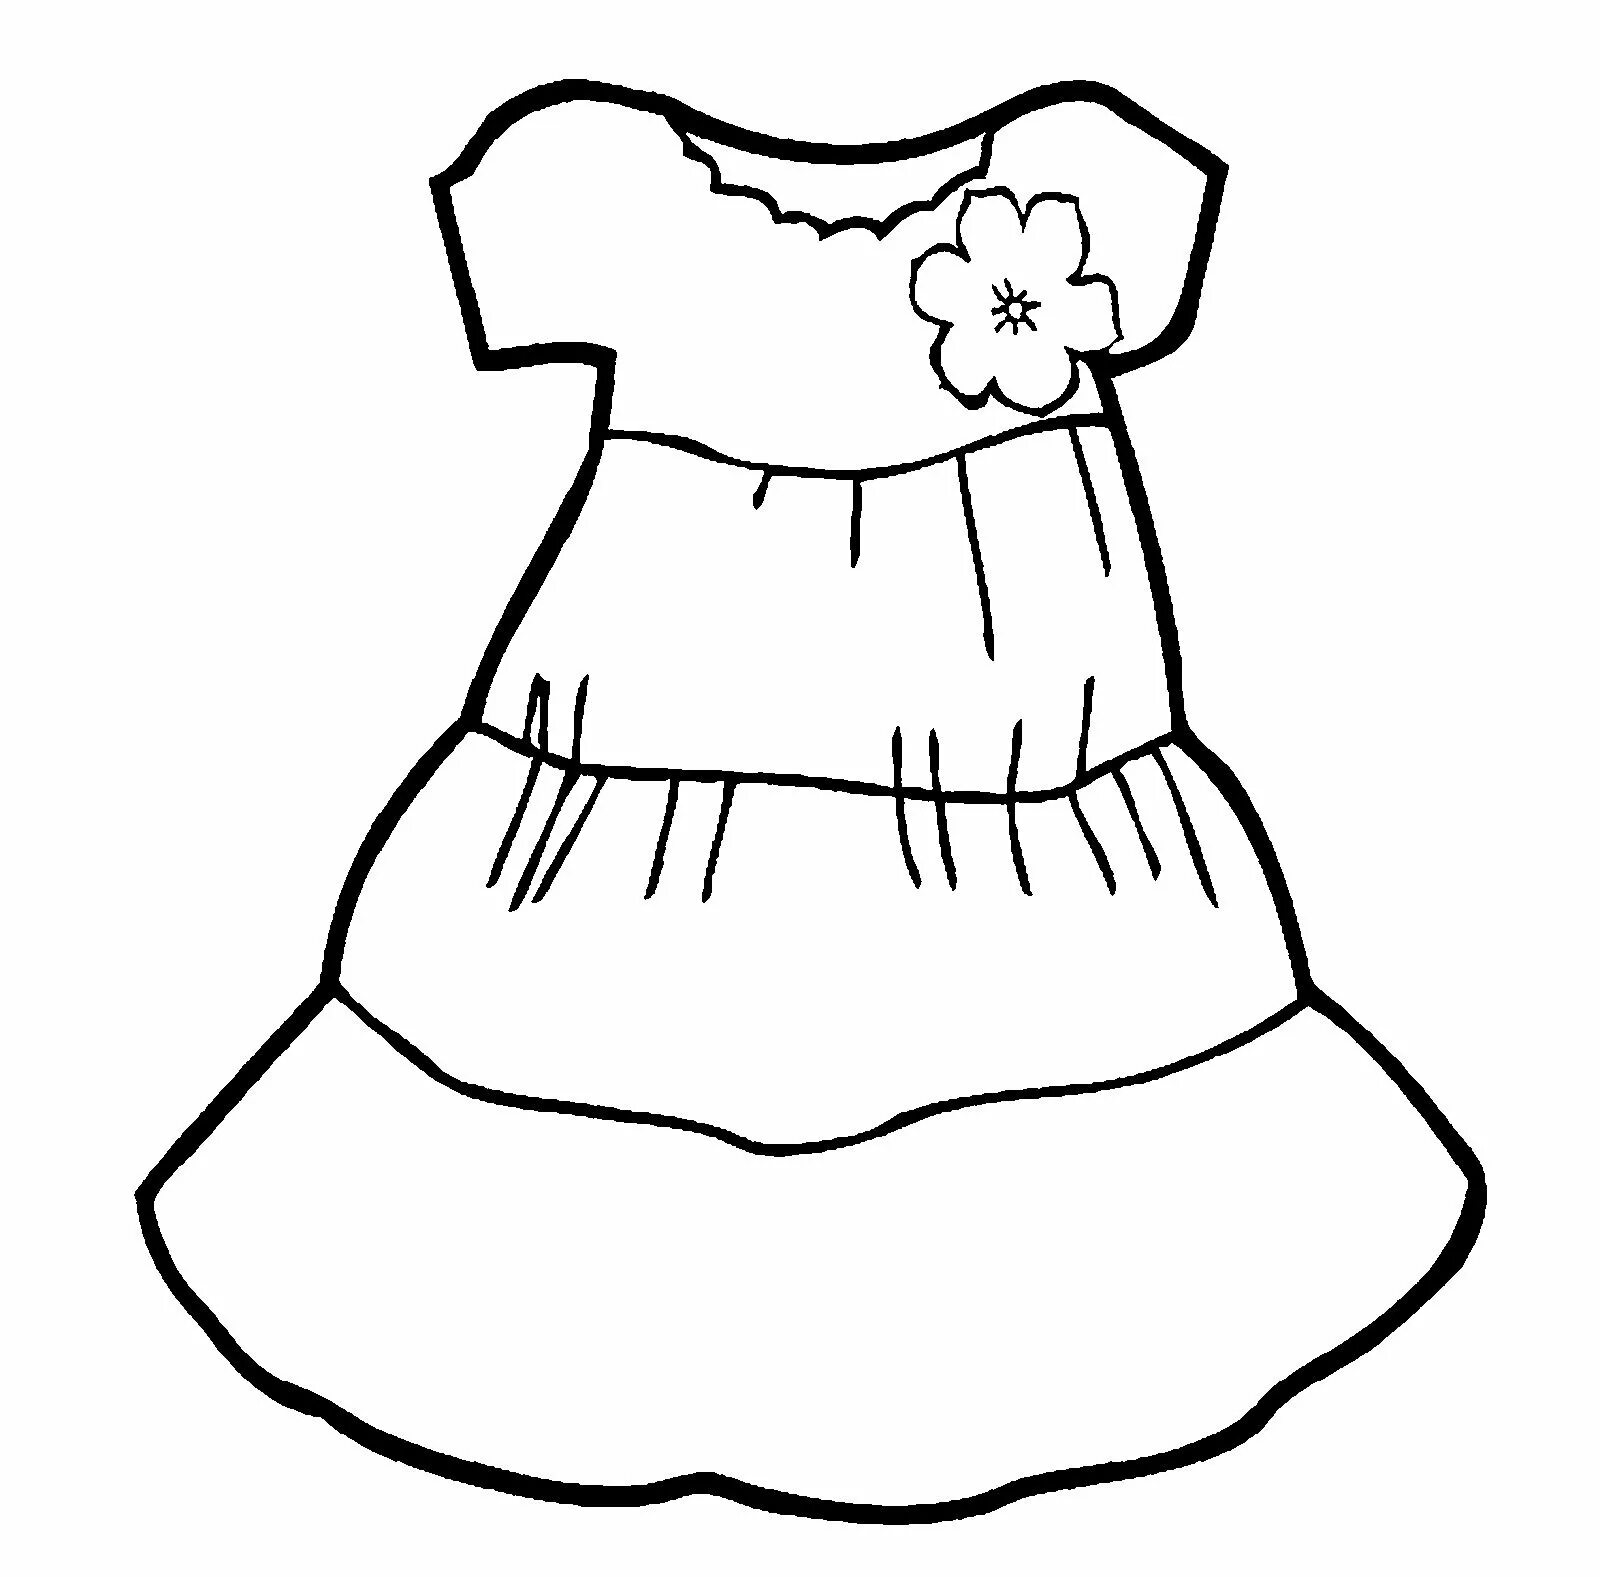 Colorific dress coloring page for children 2-3 years old